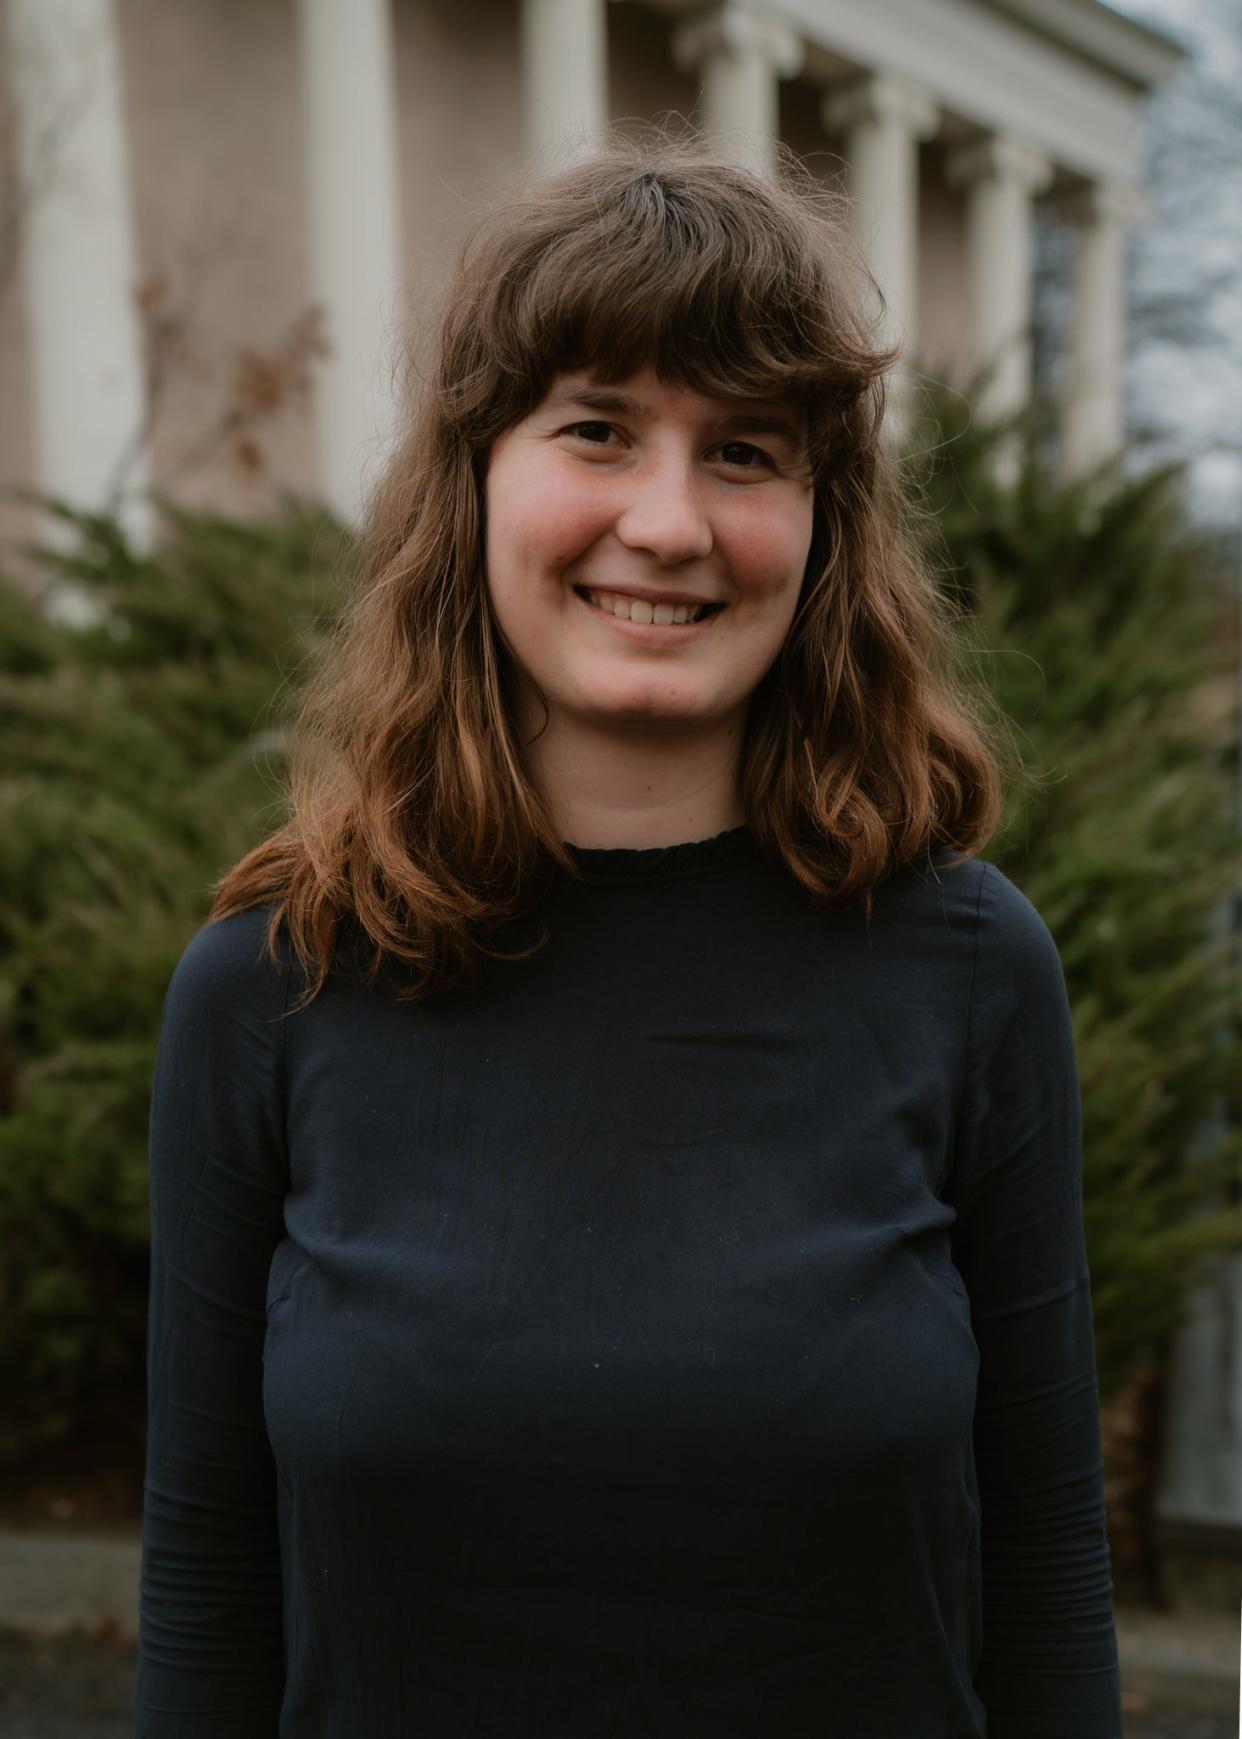 Bard College student Elisabeth Sundberg of Sarasota has won a 2022 Davis Projects for Peace prize for an initiative that addresses food insecurity in West Virginia. "Peace is promoted when everyone has the right to local, sustainable, and nutritious produce," Sundberg said.